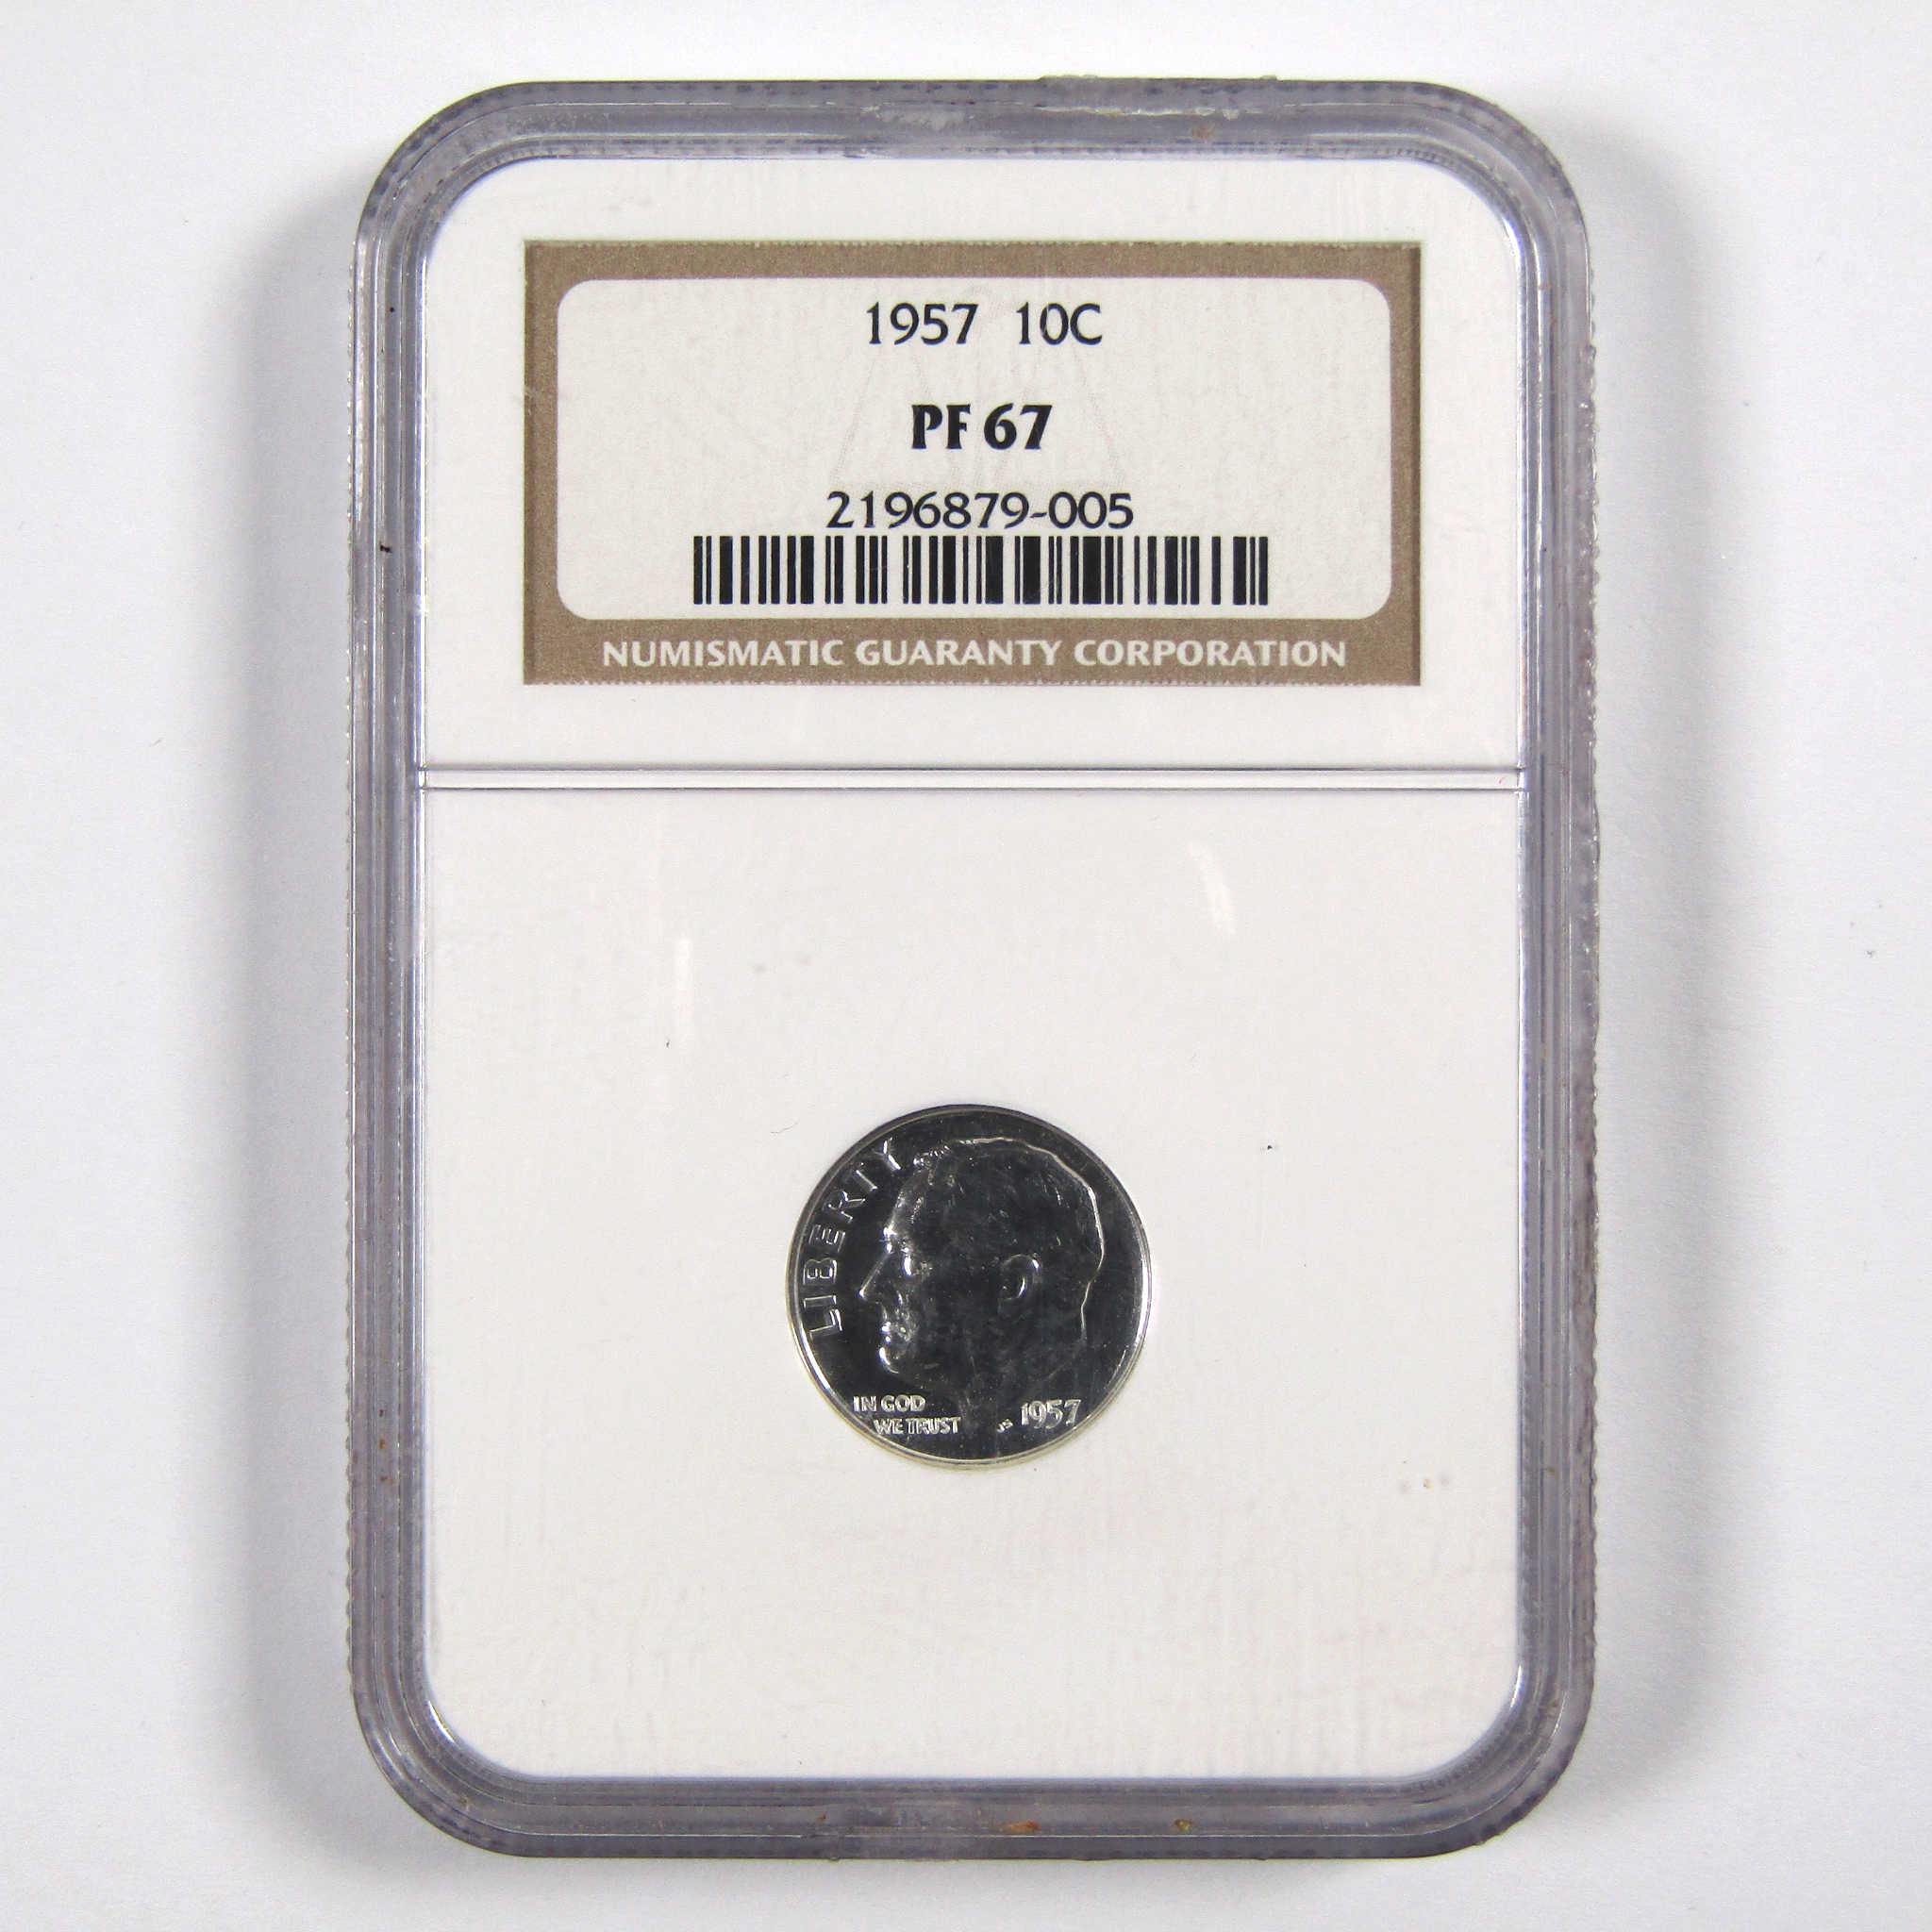 1957 Roosevelt Dime PF 67 NGC 90% Silver 10c Proof Coin SKU:CPC3579